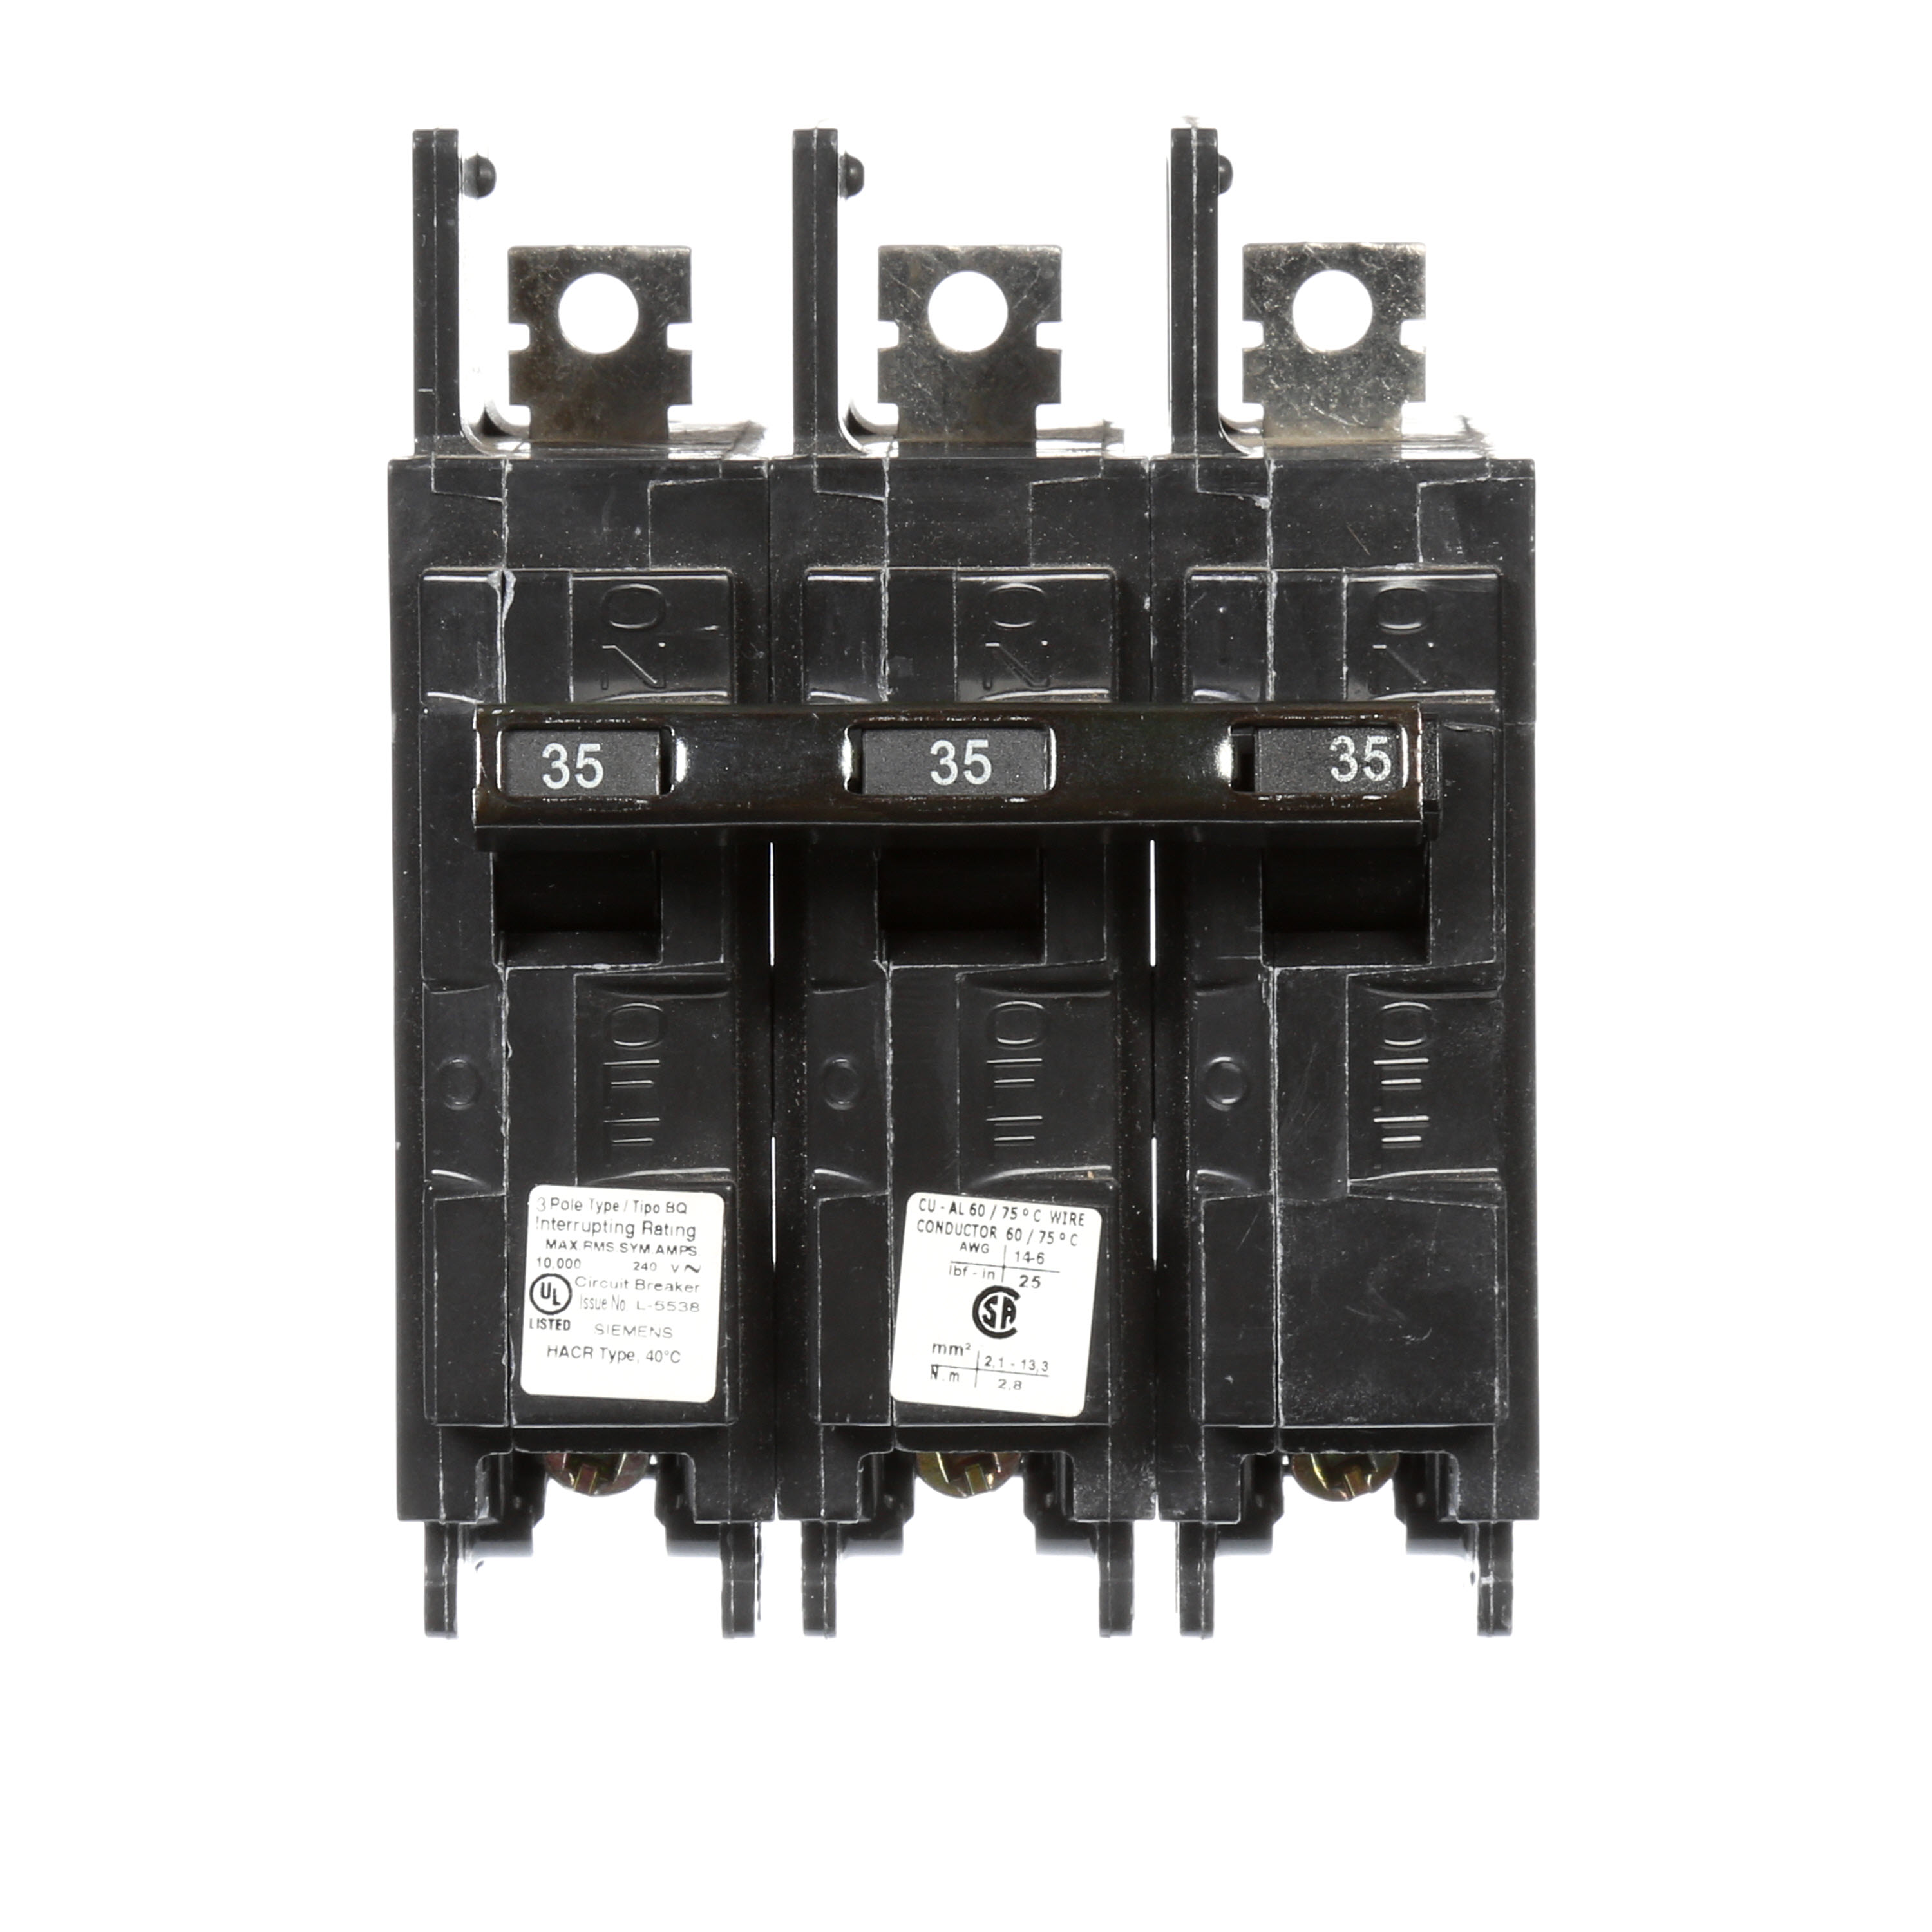 Siemens Low Voltage Molded Case Circuit Breakers General Purpose MCCBs are Circuit Protection Molded Case Circuit Breakers. 3-Pole Common-Trip circuit breaker type BQ. Rated 240V (035A) (AIR 10 kA). Special features Load side lugs are included.